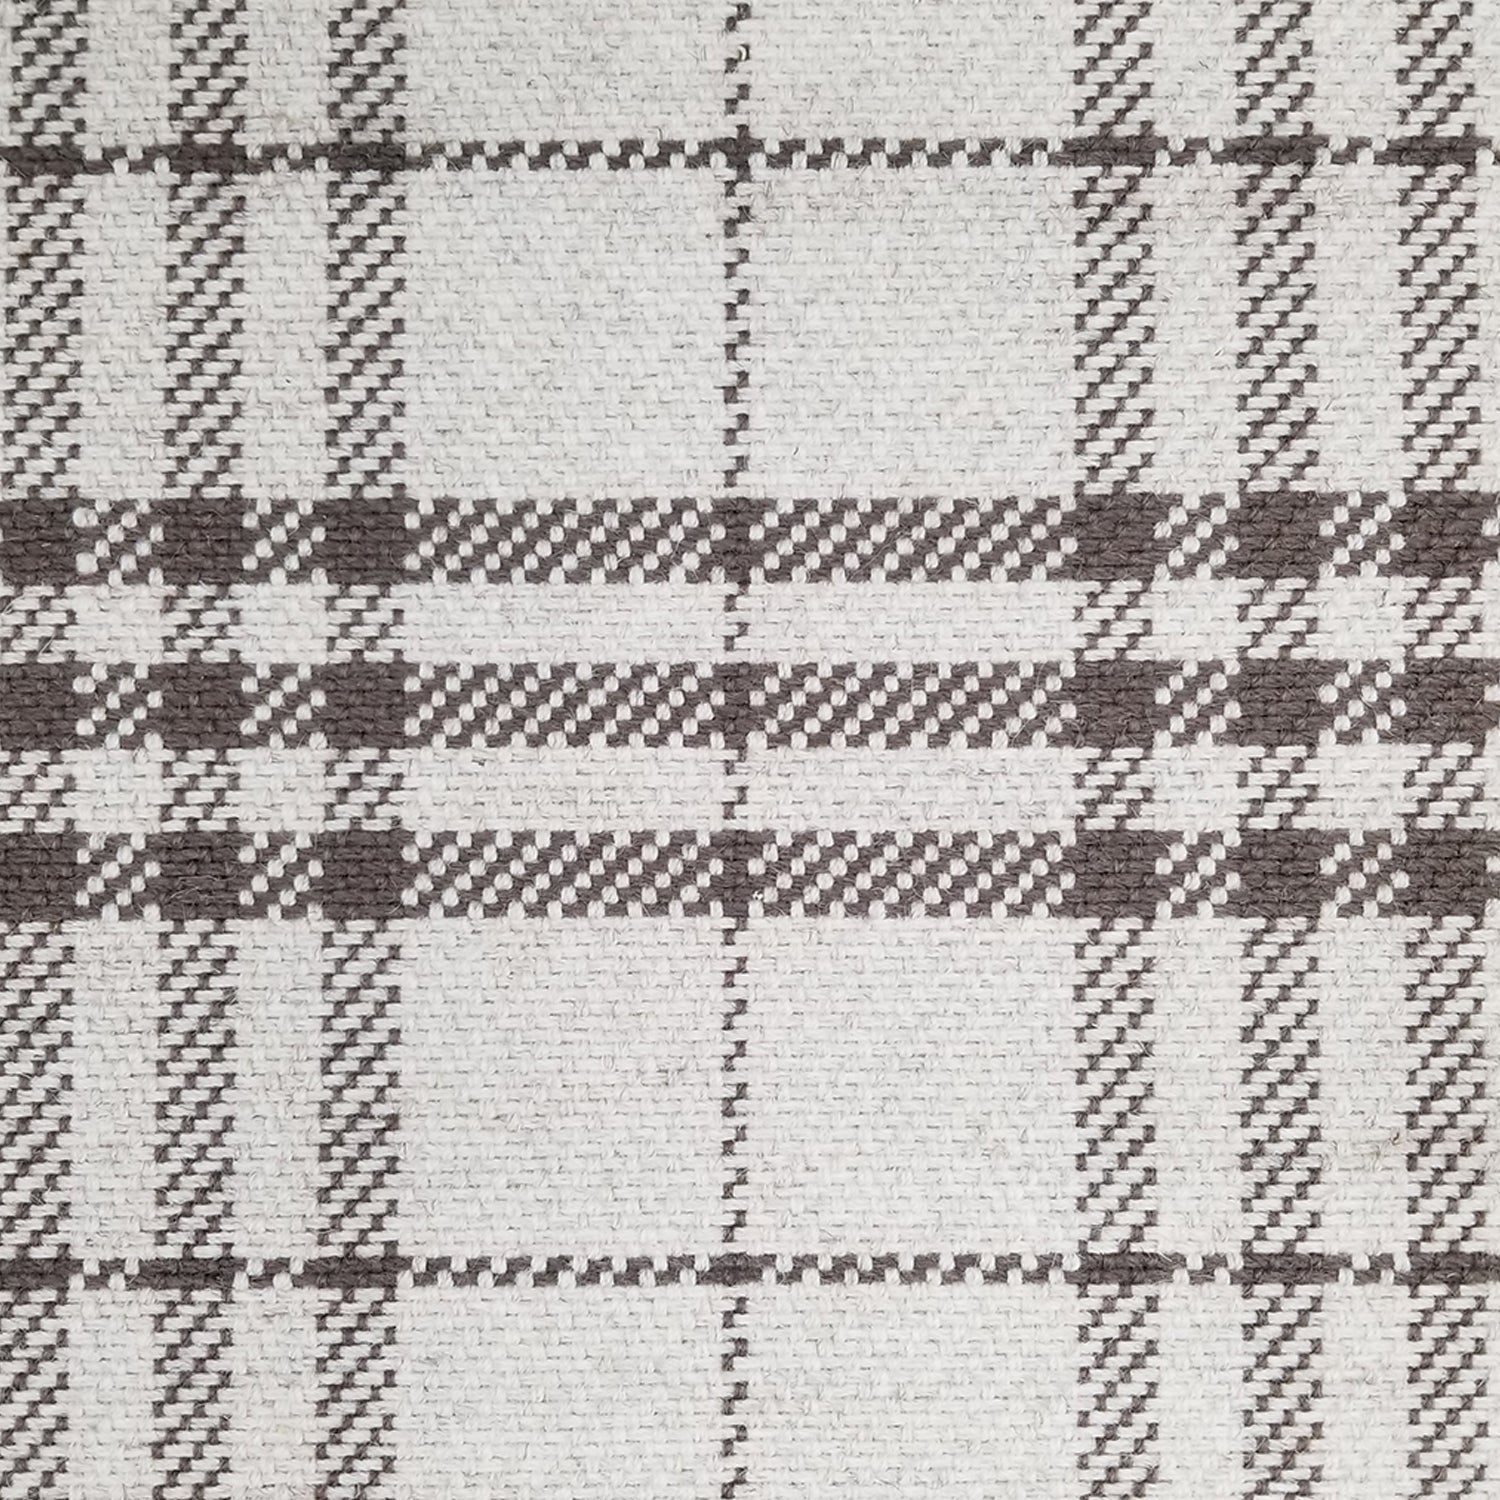 Wool broadloom carpet swatch in a gray and cream plaid pattern.